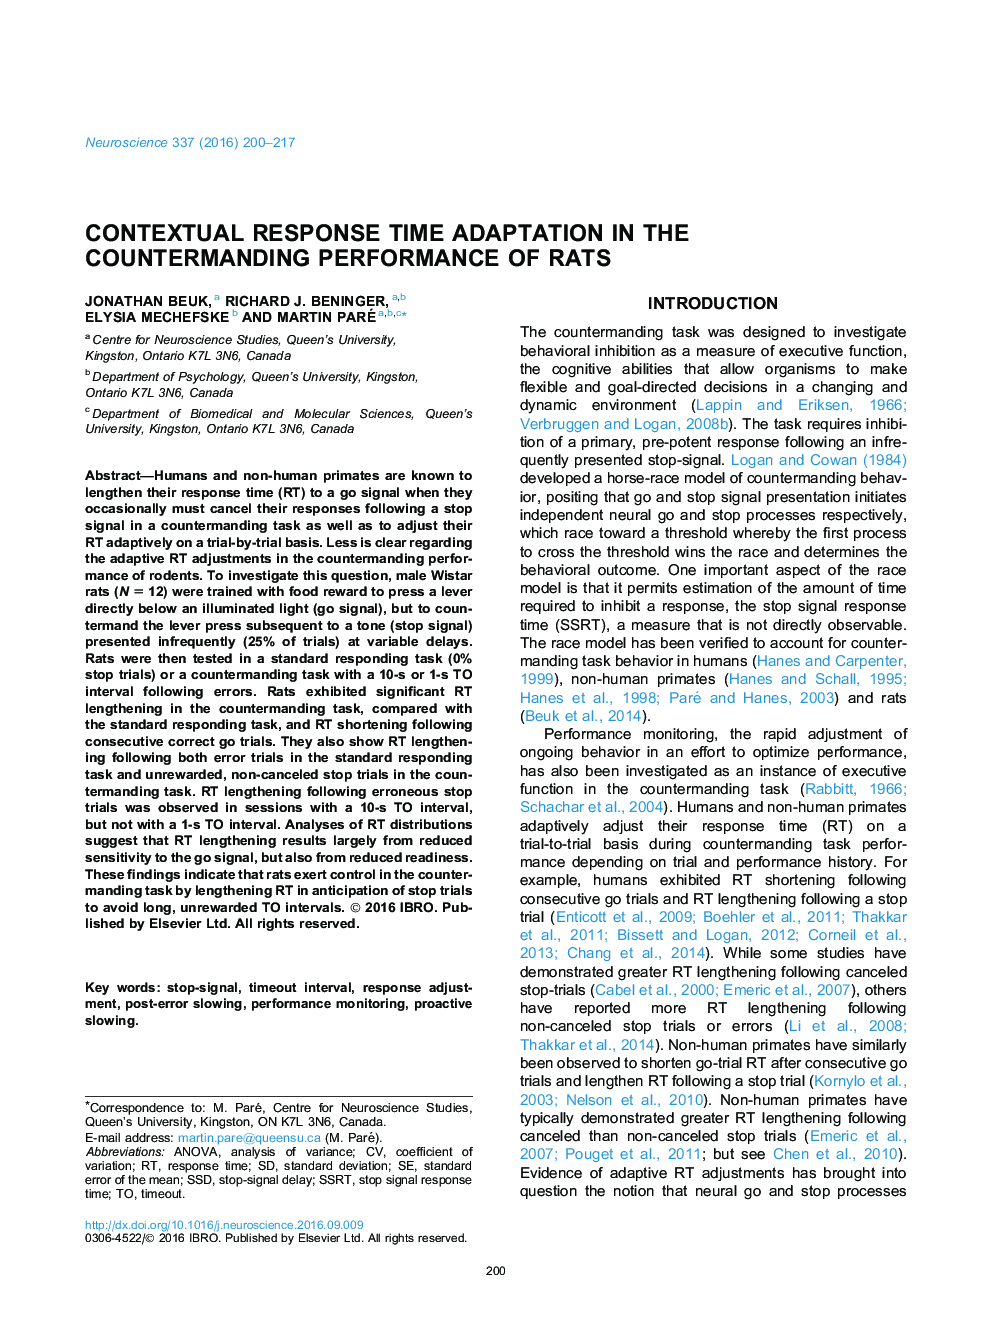 Contextual response time adaptation in the countermanding performance of rats